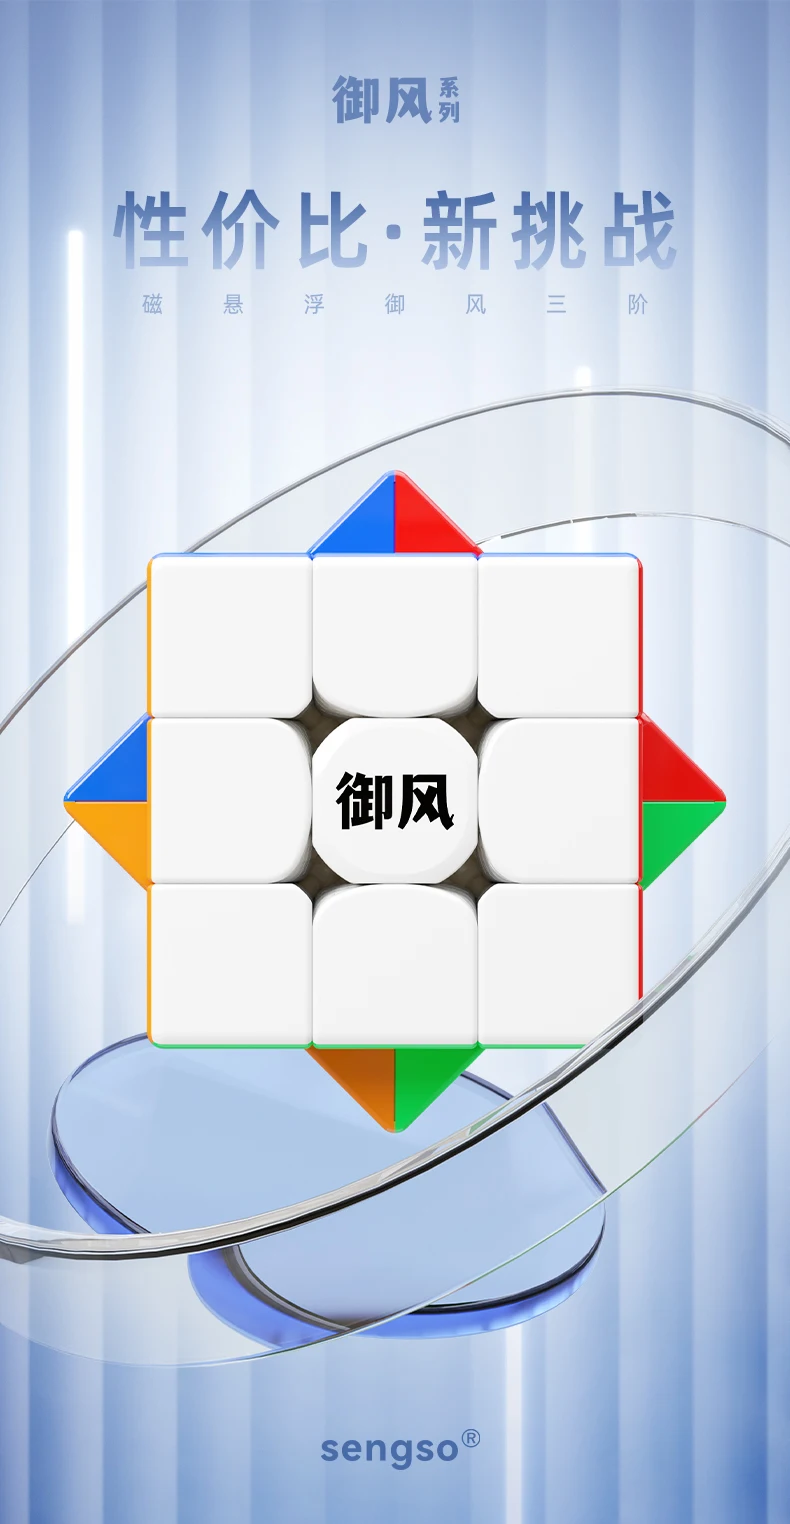 

[Ecube] SengSo Yufeng Maglev Magic Cube 3x3 Ball Core Magnetic Professional 3x3x3 Speed Puzzle Children Fidget Toy 3×3 Cubo